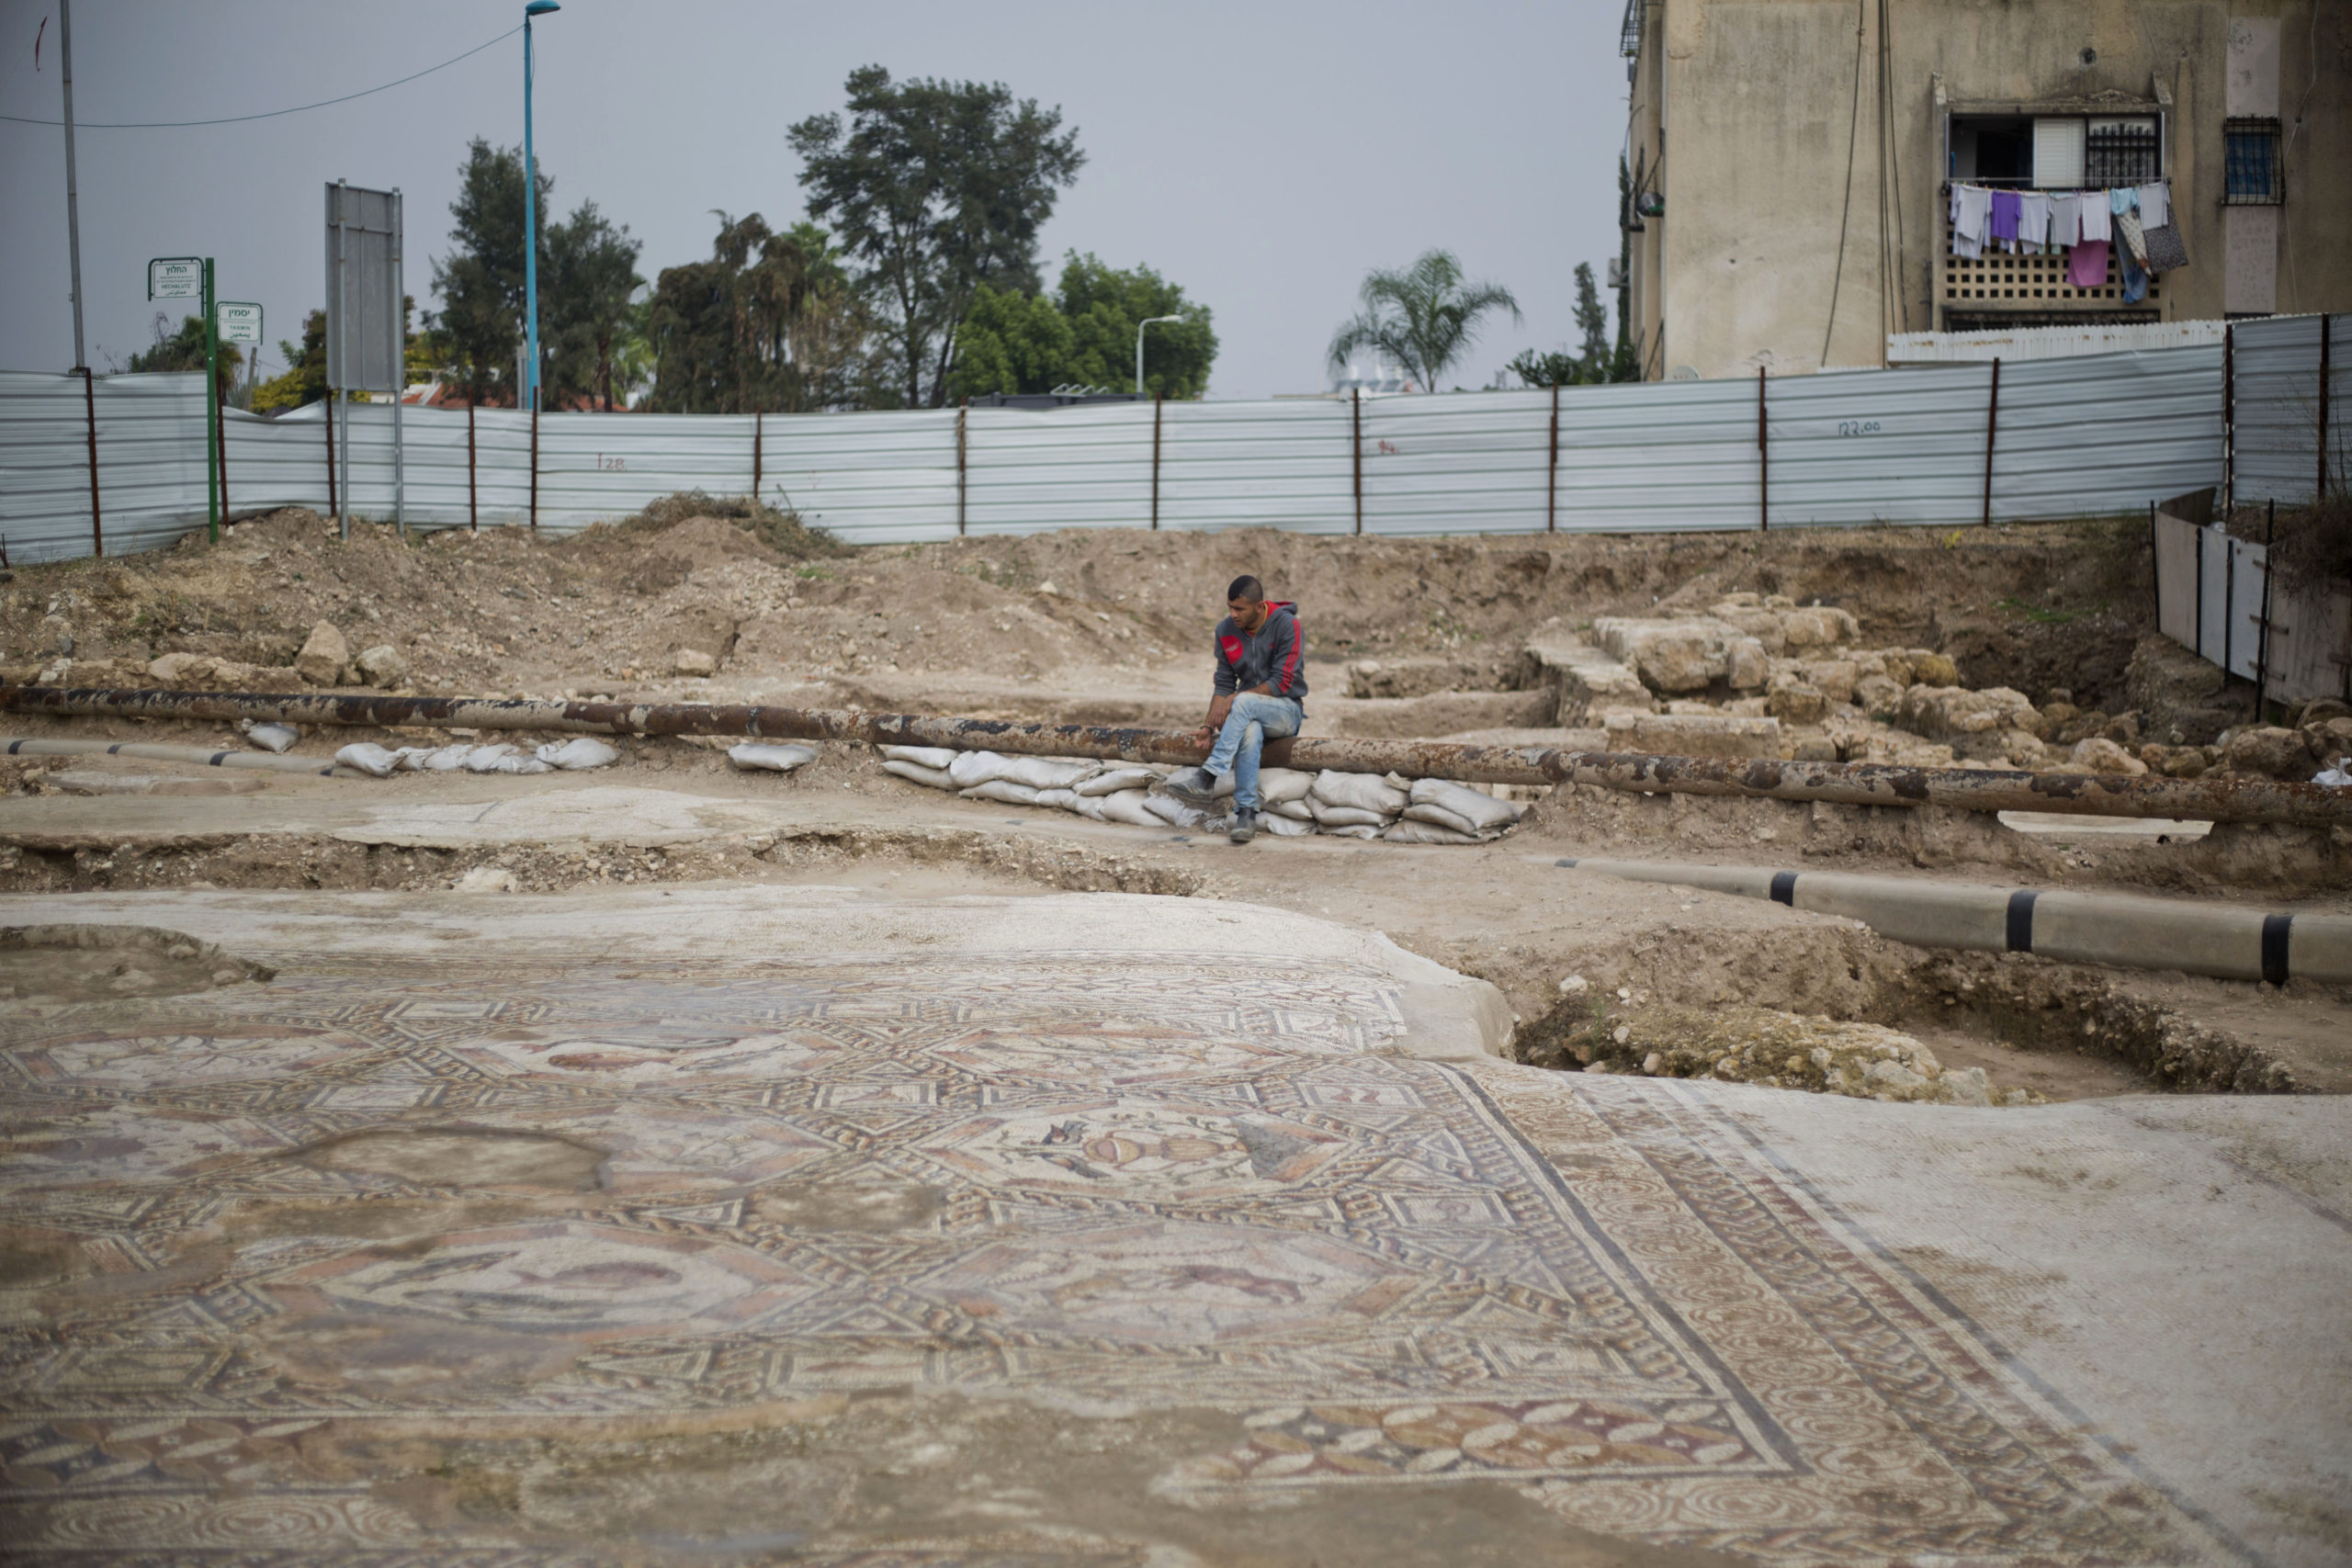 These Huge Roman Mosaics Were Hidden Under City Streets For 1700 Years 